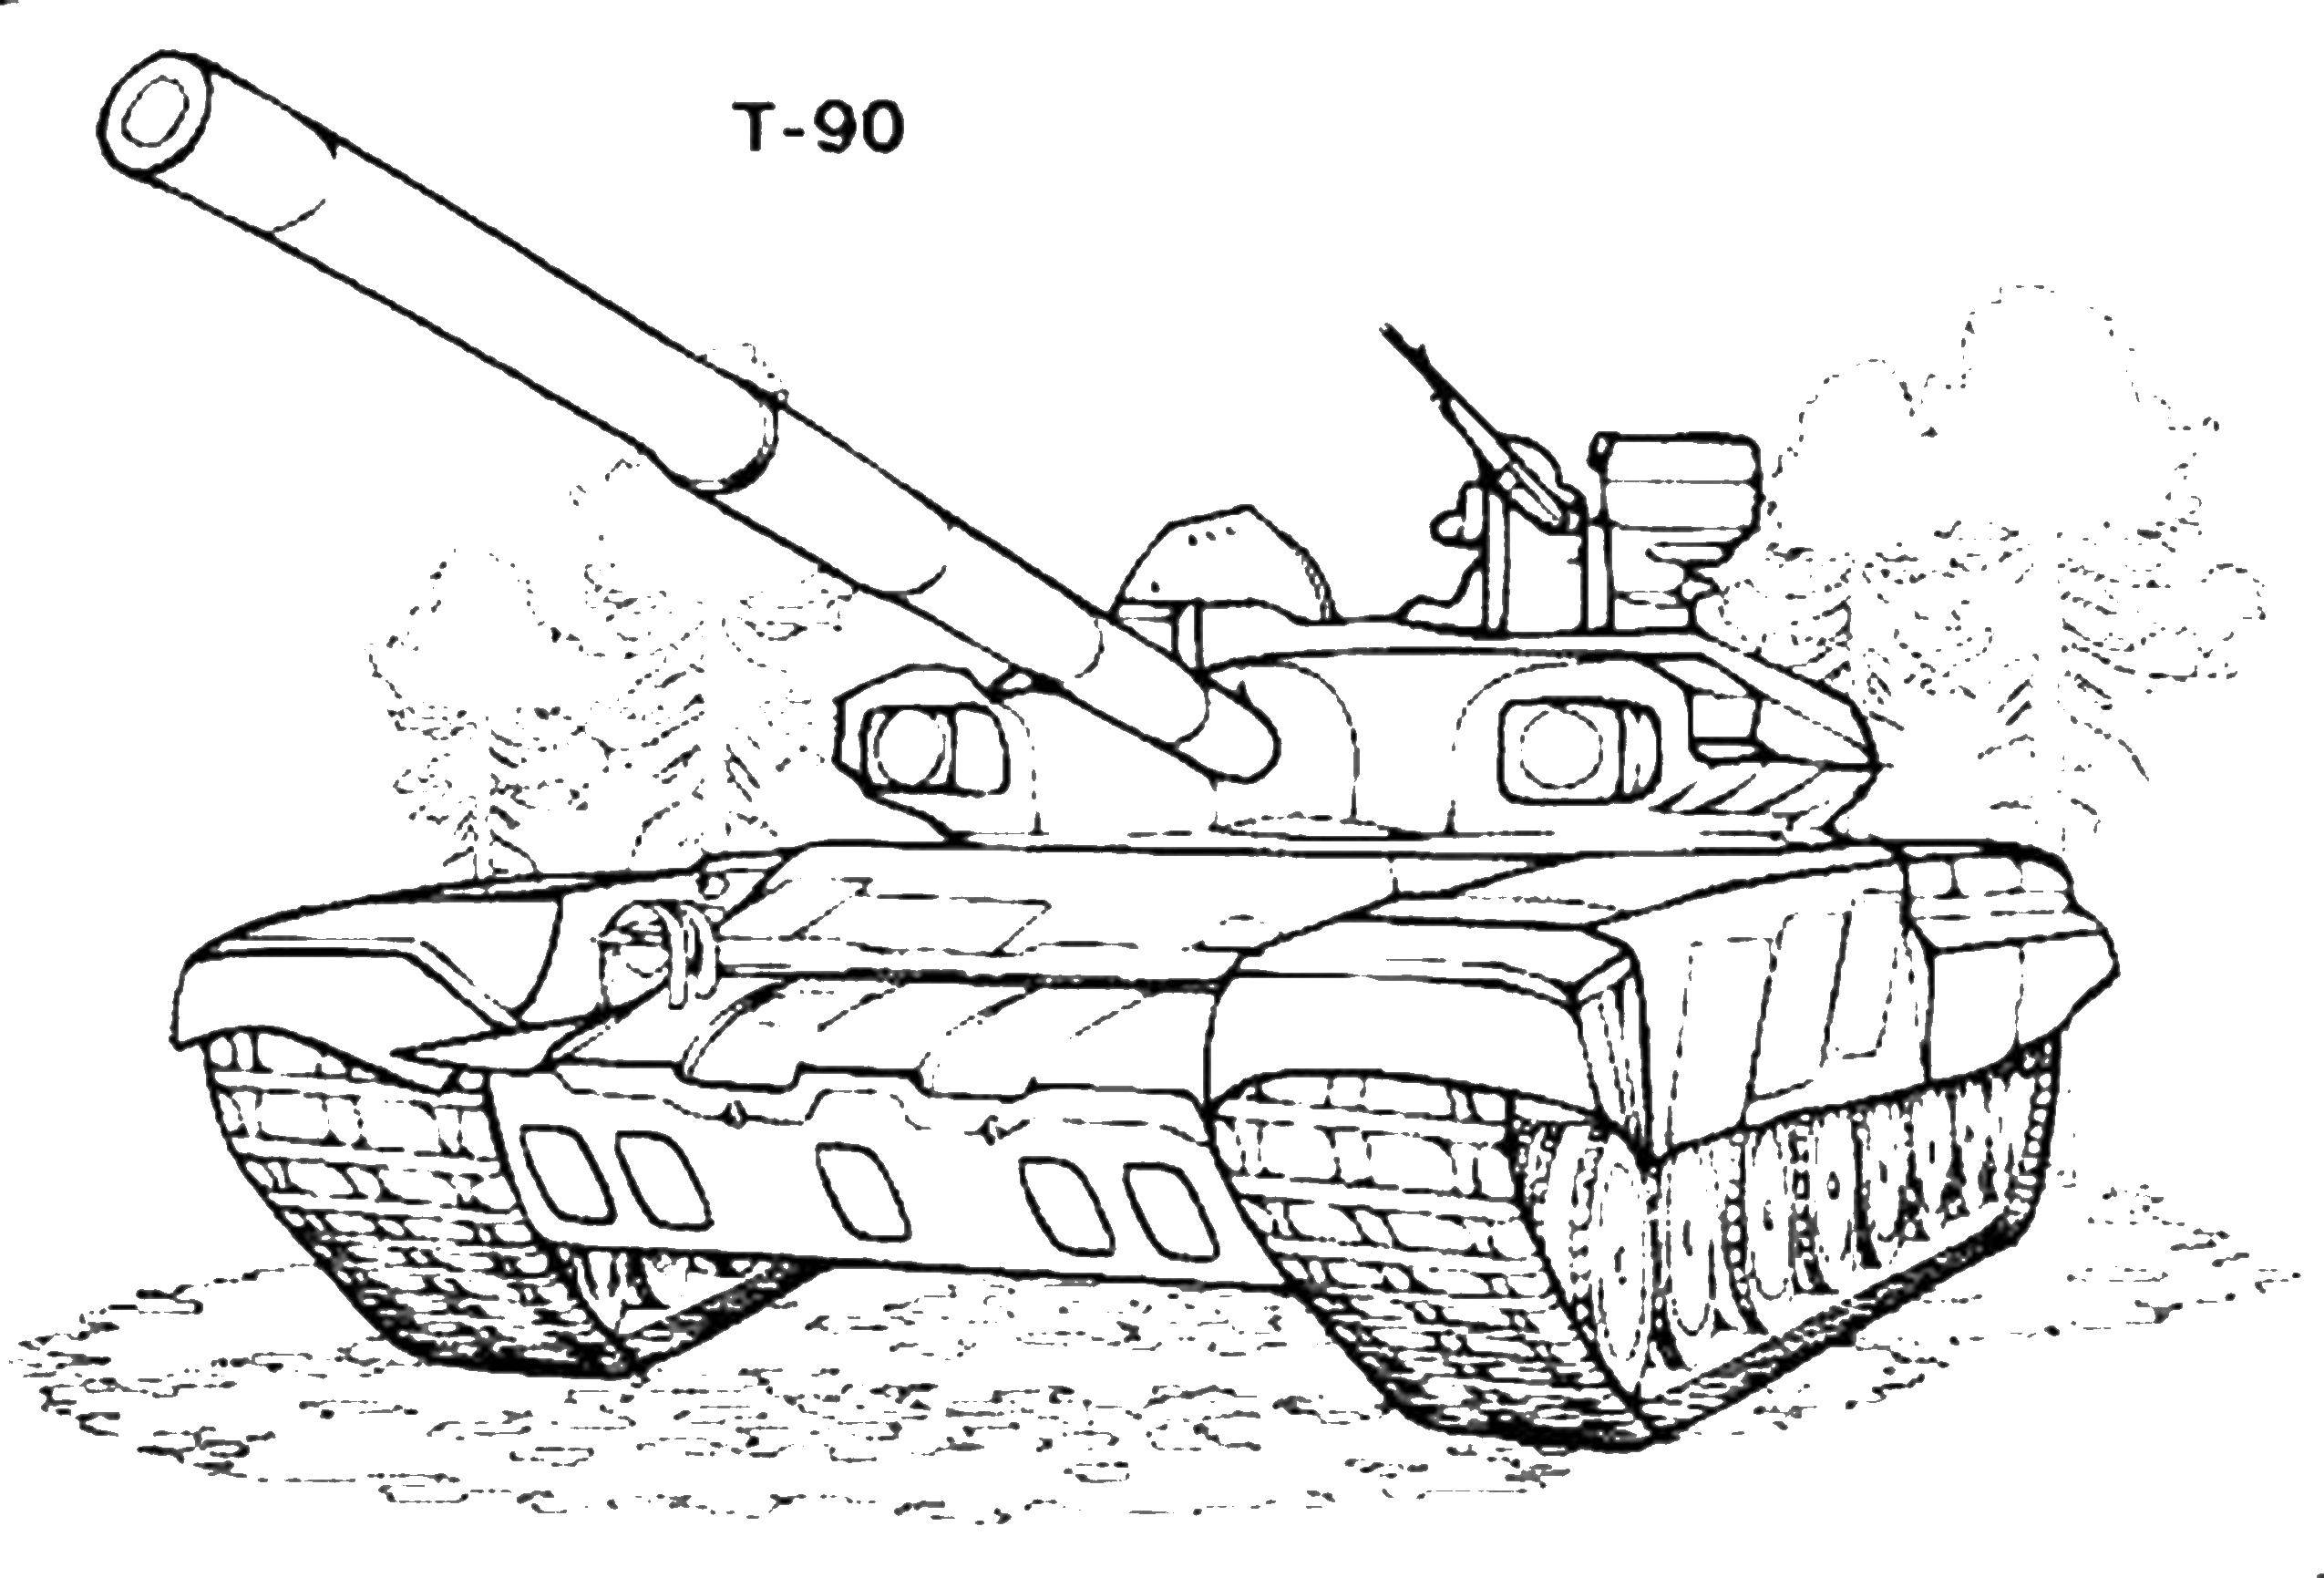 Coloring T-90 tank. Category military. Tags:  military, tank.